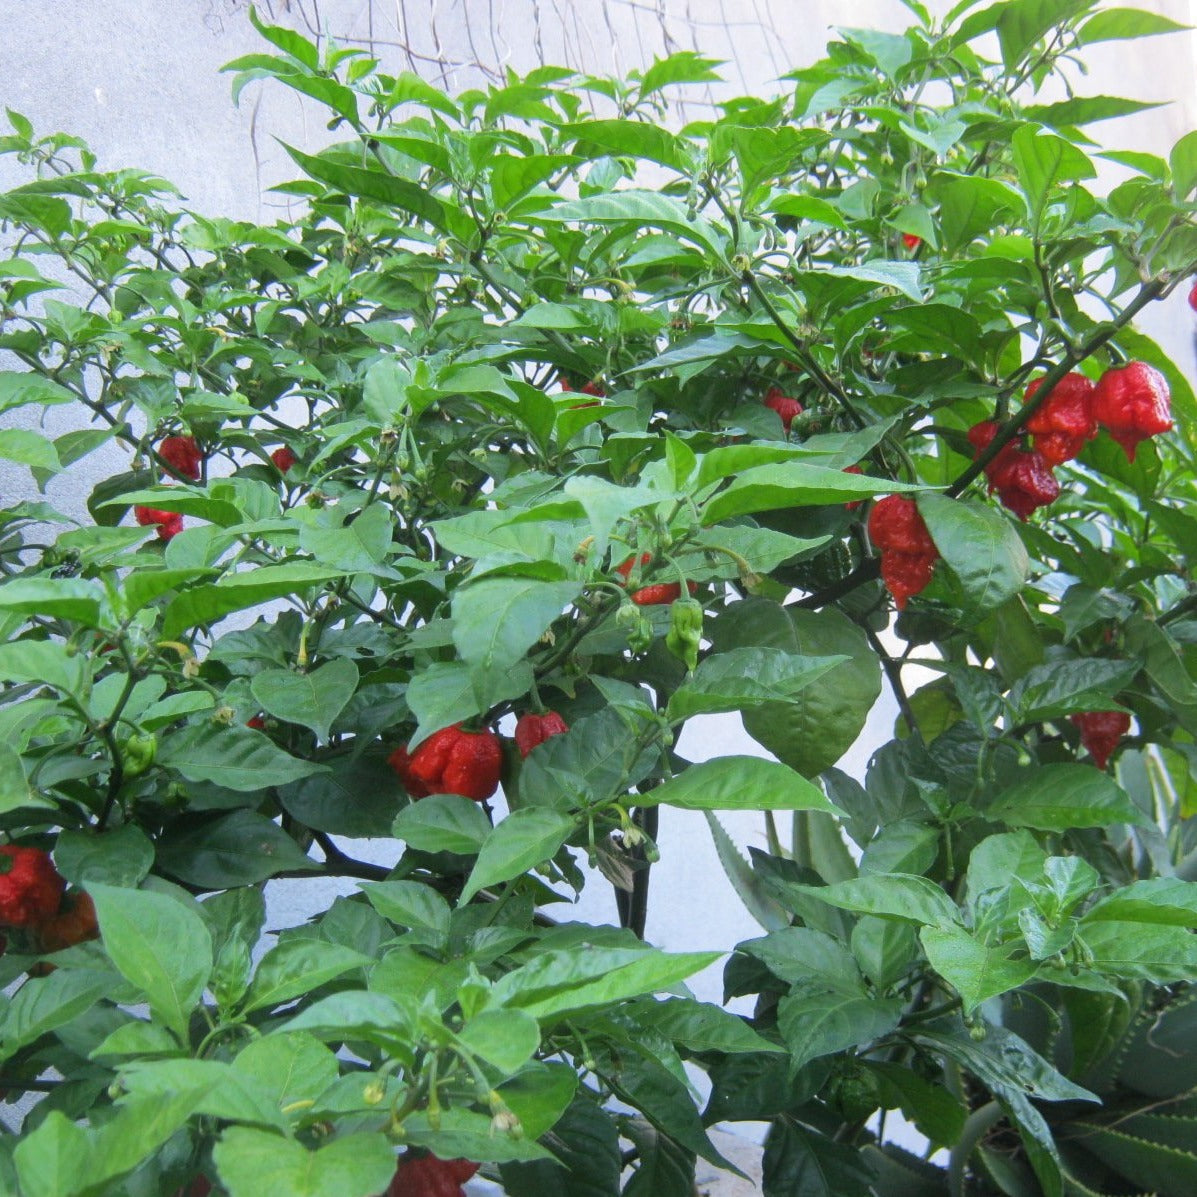 Carolina Reaper Pepper Plant | The Carolina Reaper Pepper Plant is a fiery  hot chili grown in warm climates. It can reach up to 2 feet tall and is